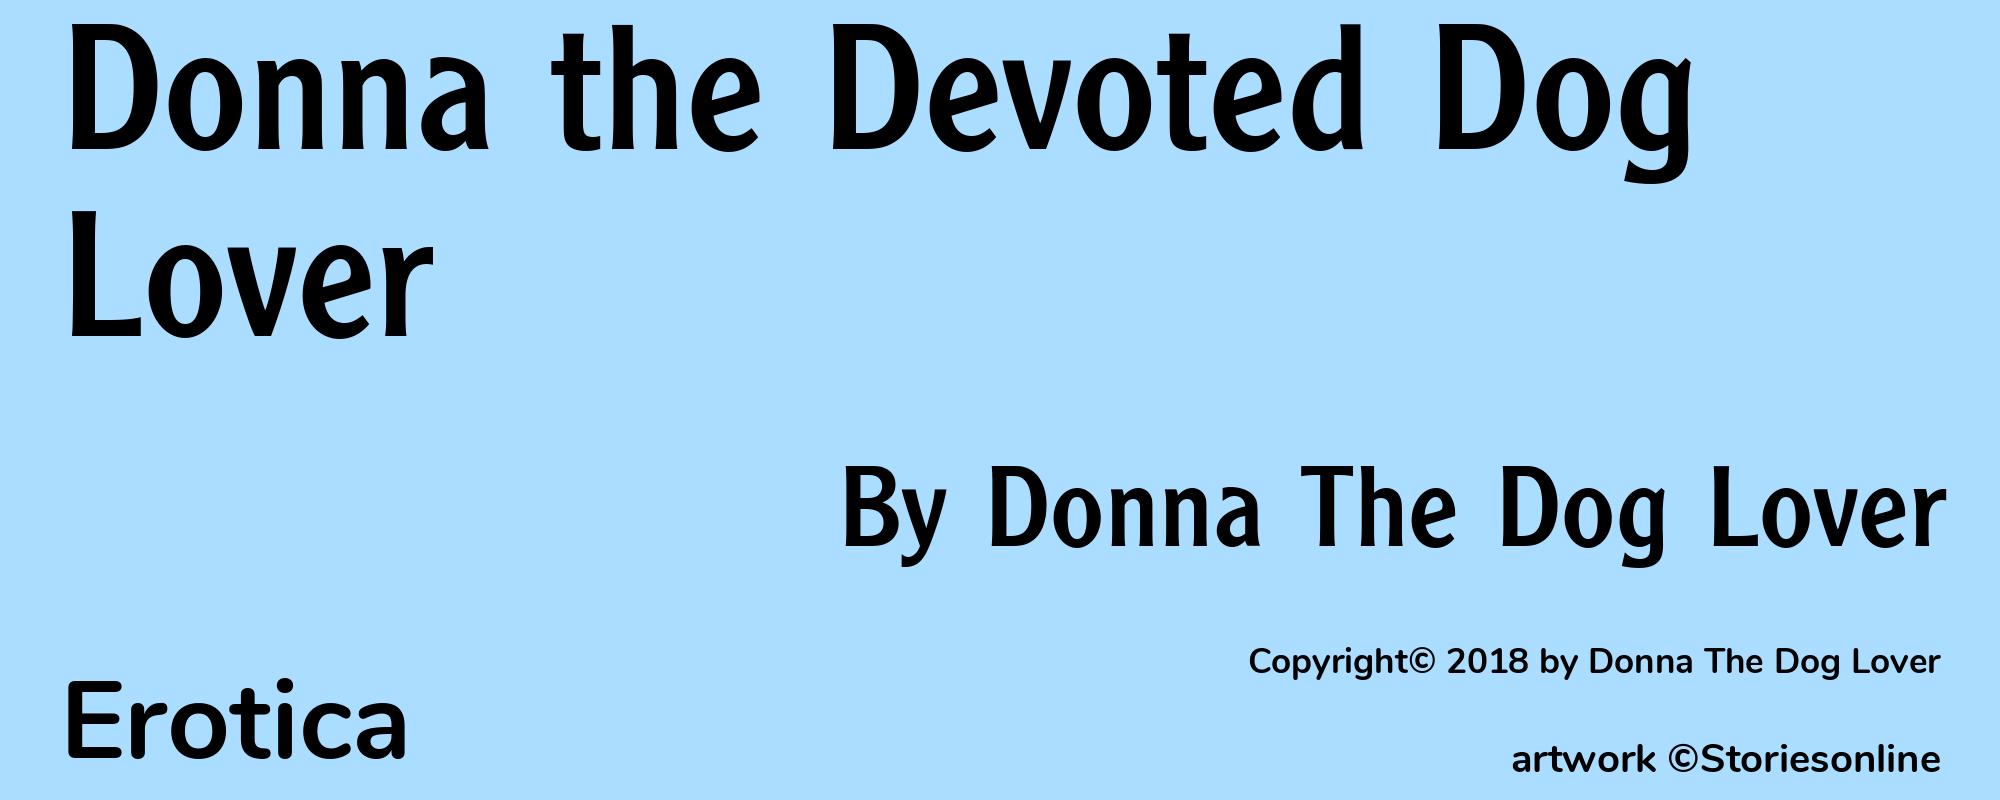 Donna the Devoted Dog Lover - Cover